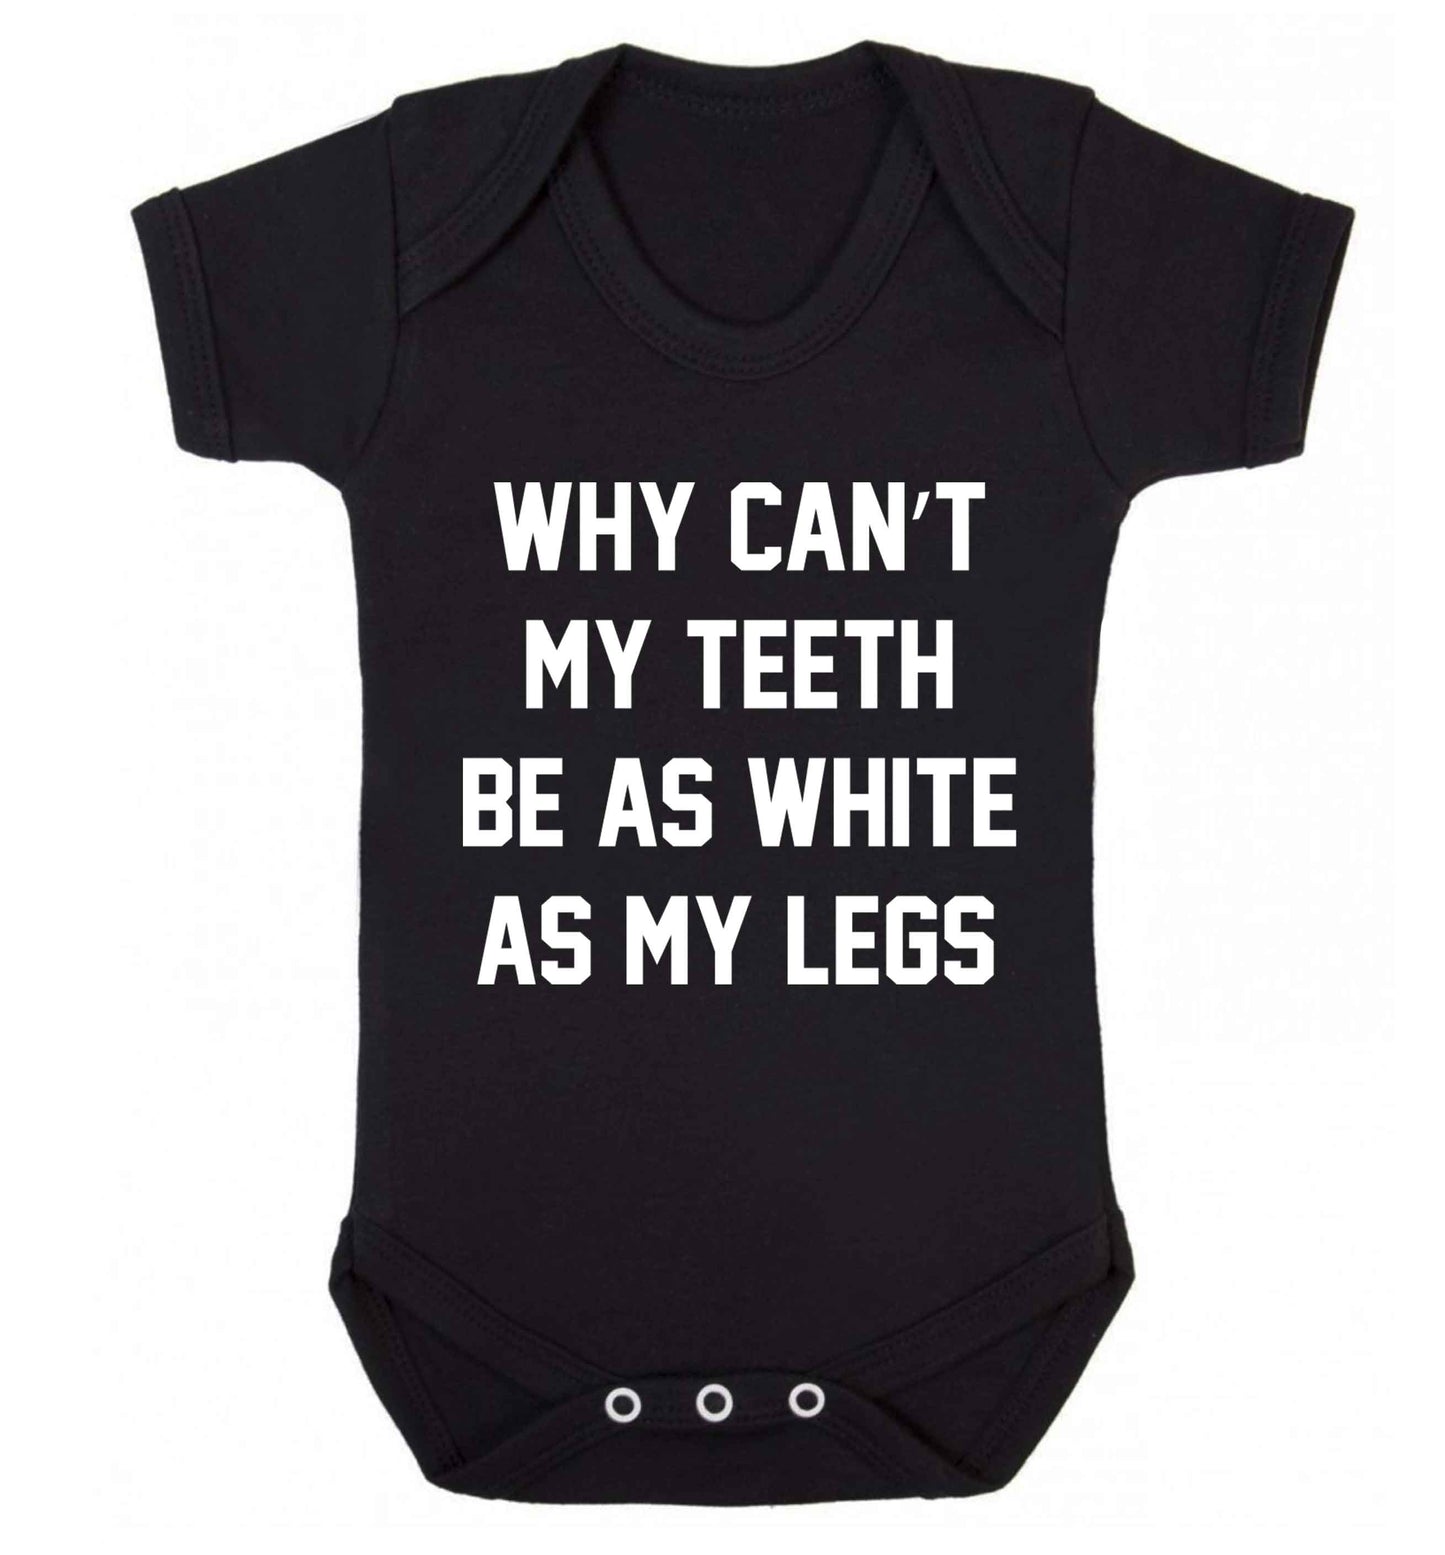 Why can't my teeth be as white as my legs Baby Vest black 18-24 months